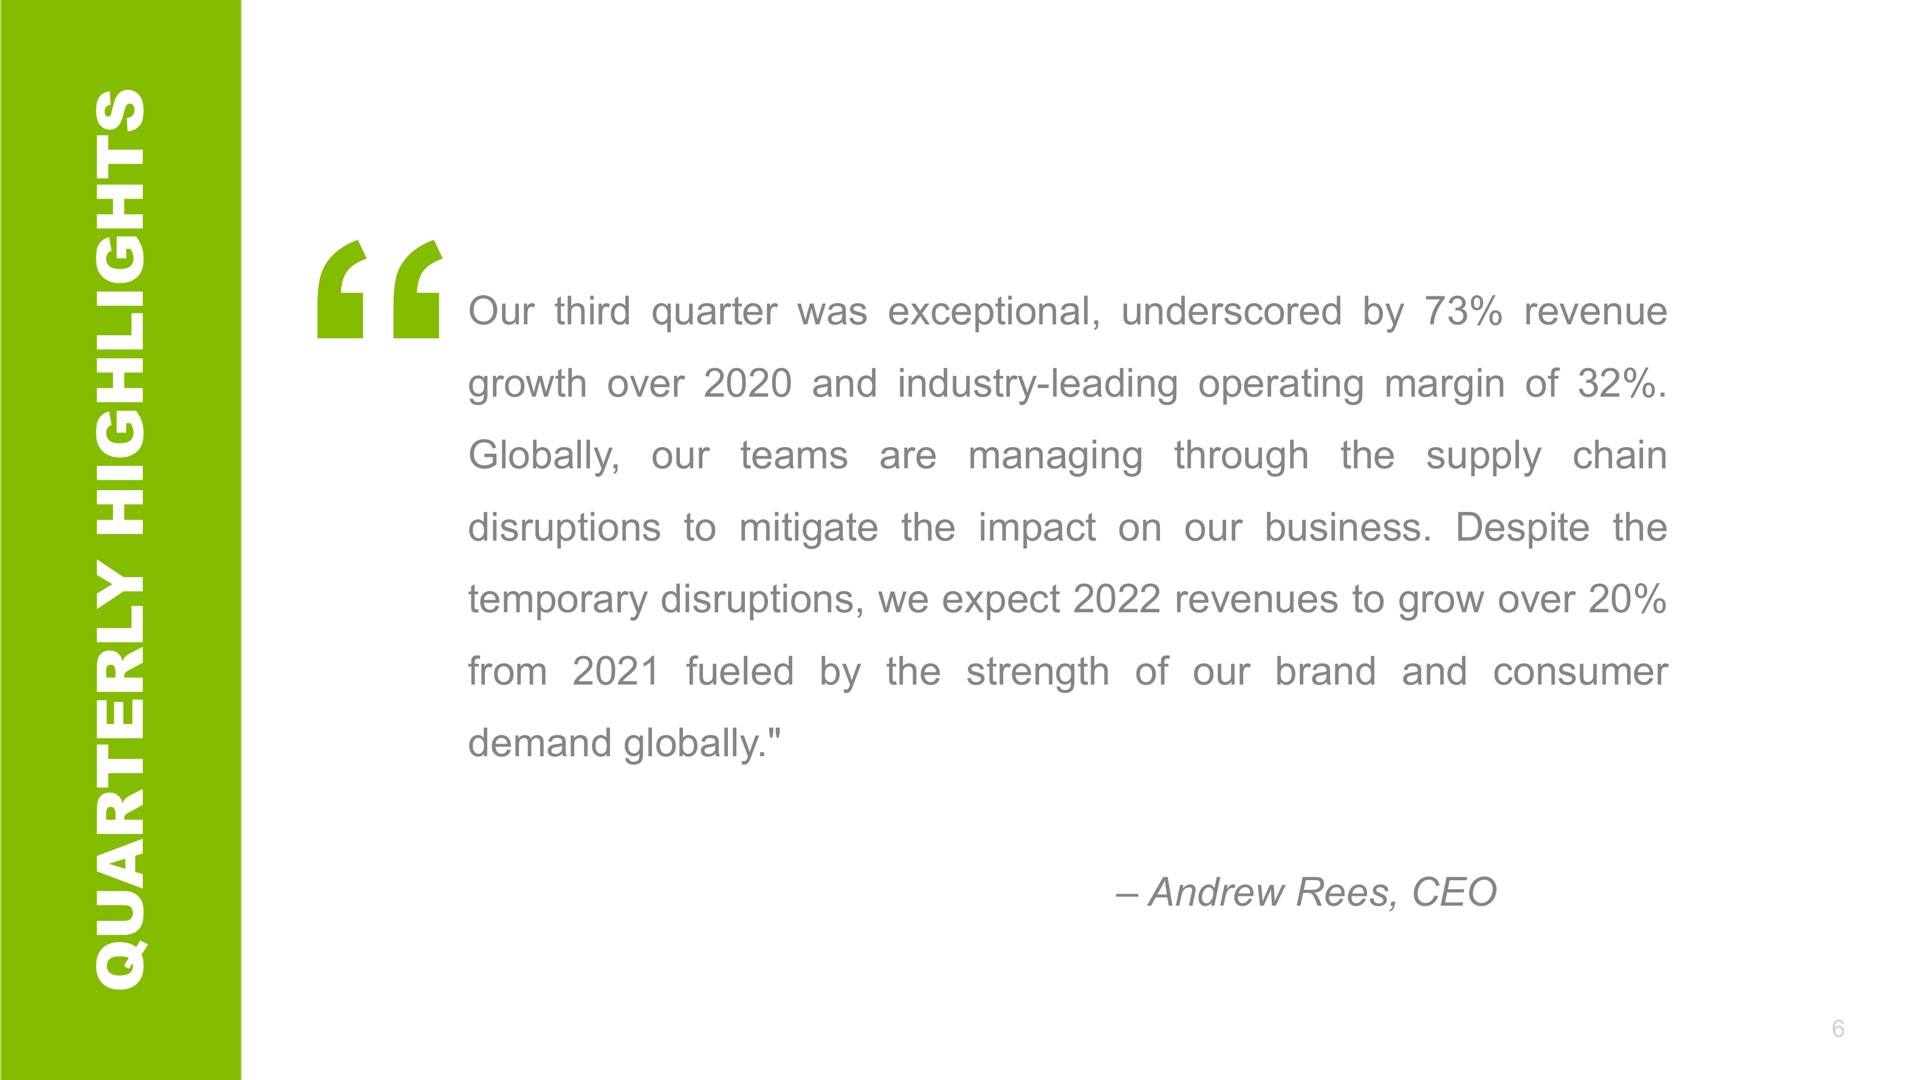 a our third quarter was exceptional underscored by revenue growth over and industry leading operating margin of globally our teams are managing through the supply chain disruptions to mitigate the impact on our business despite the temporary disruptions we expect revenues to grow over from fueled by the strength of our brand and consumer demand globally as | Crocs